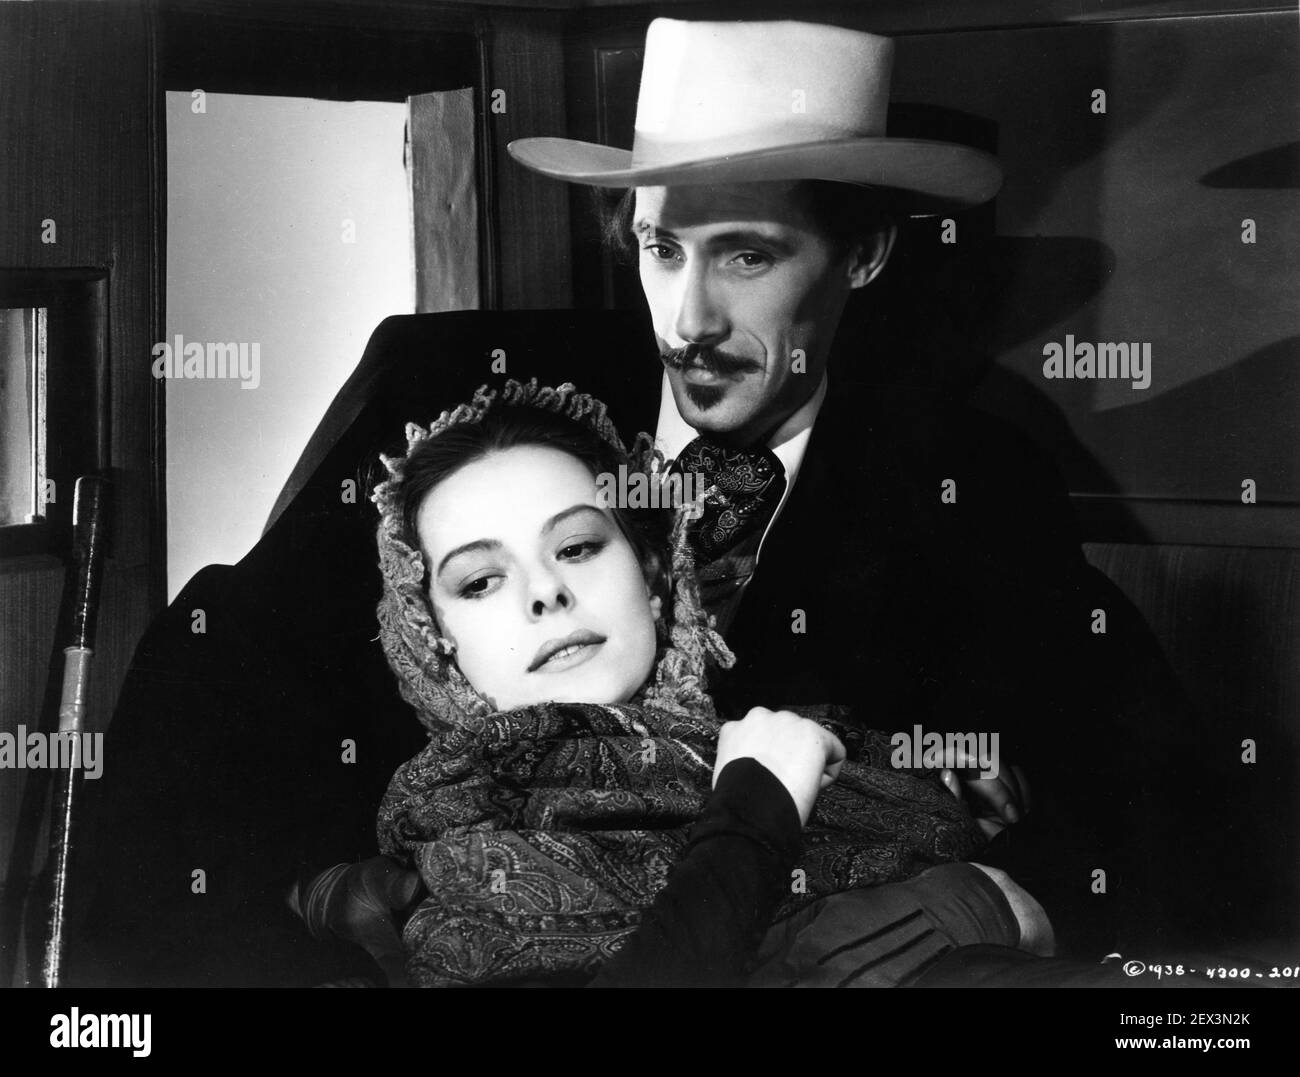 LOUISE PLATT and JOHN CARRADINE in STAGECOACH 1939 director JOHN FORD original story Ernest Haycox screenplay Dudley Nichols Walter Wanger Productions / United Artists Stock Photo